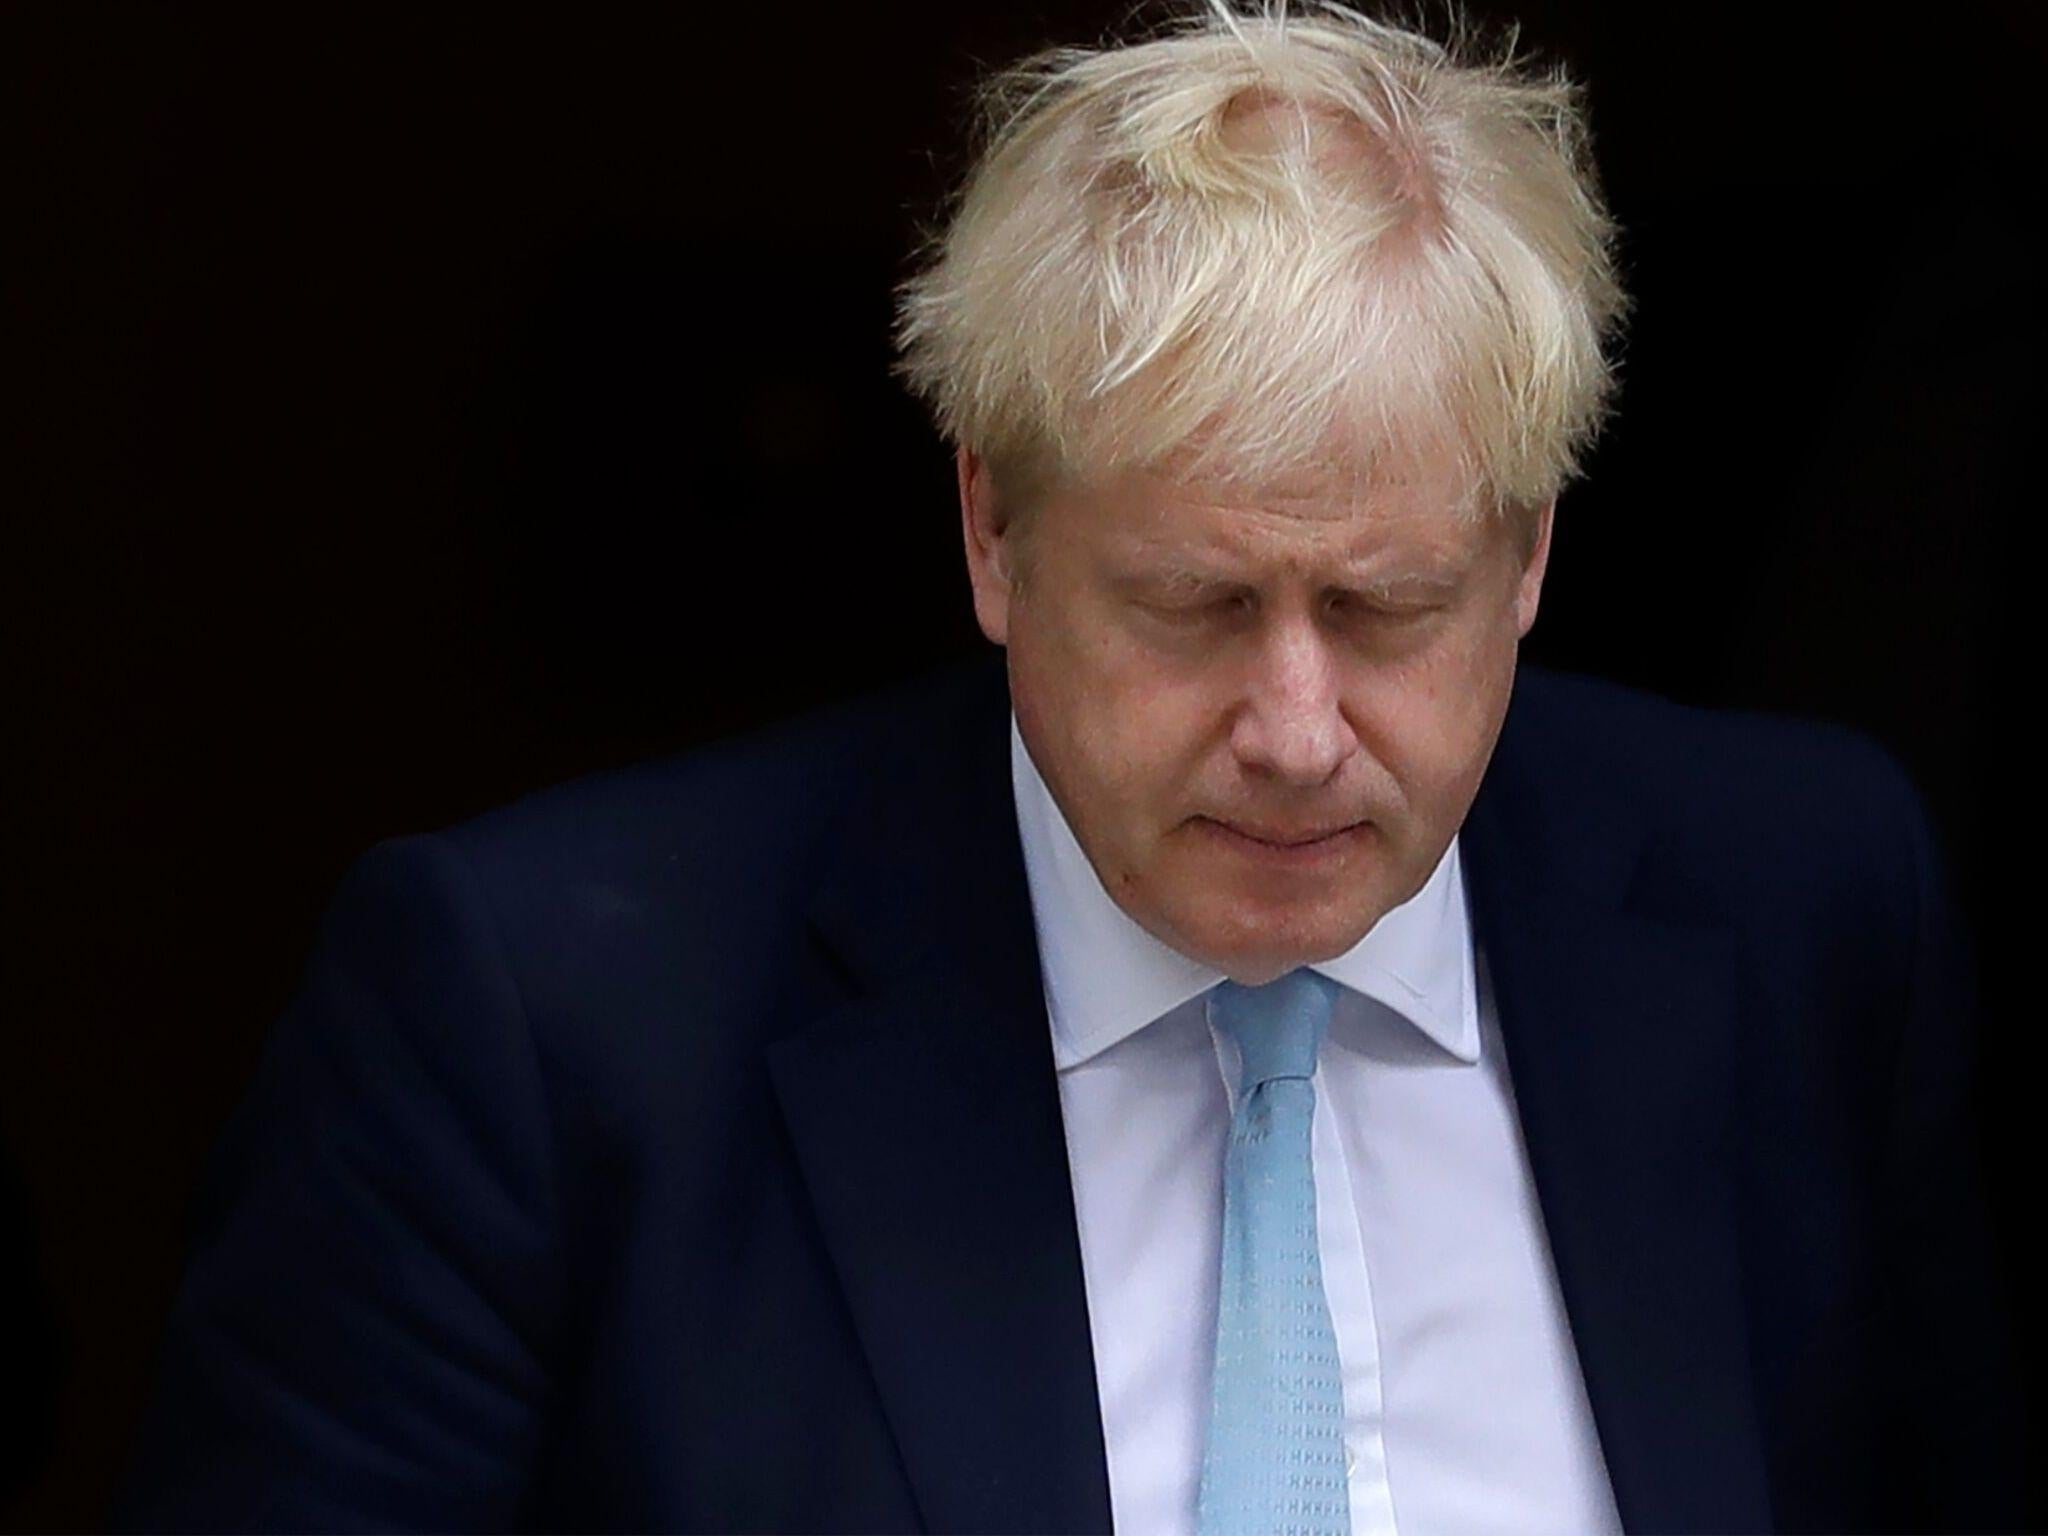 Brexit: Parliament to sit on a Saturday for first time in 37 years in last-ditch Boris Johnson bid to stop delay